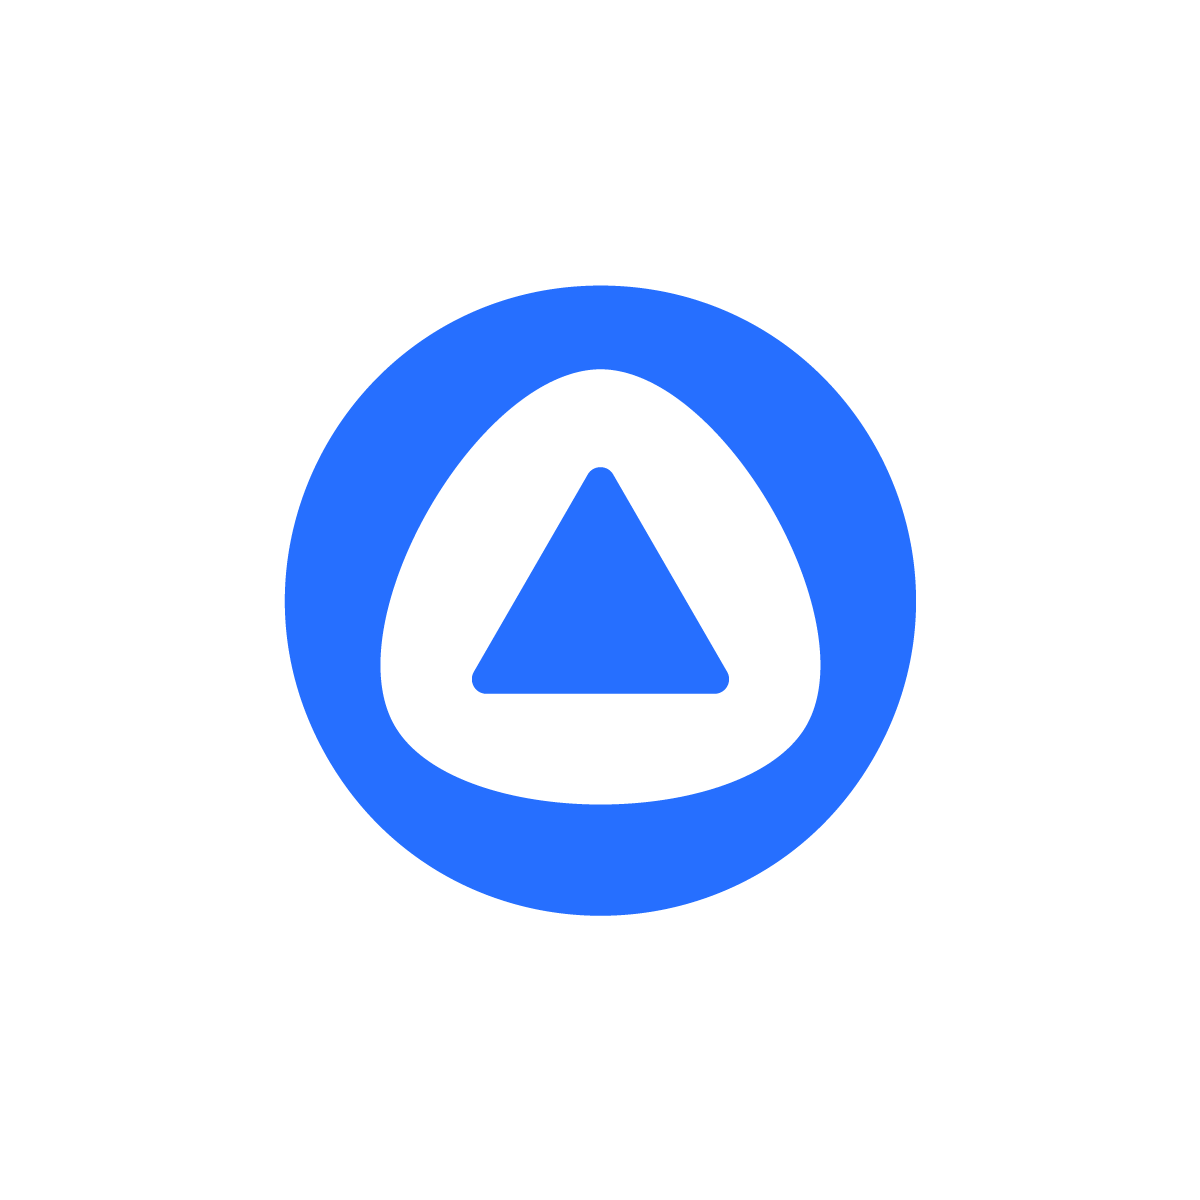 Circle Triangle Logo: Circle seamlessly transforming into a triangle inside it